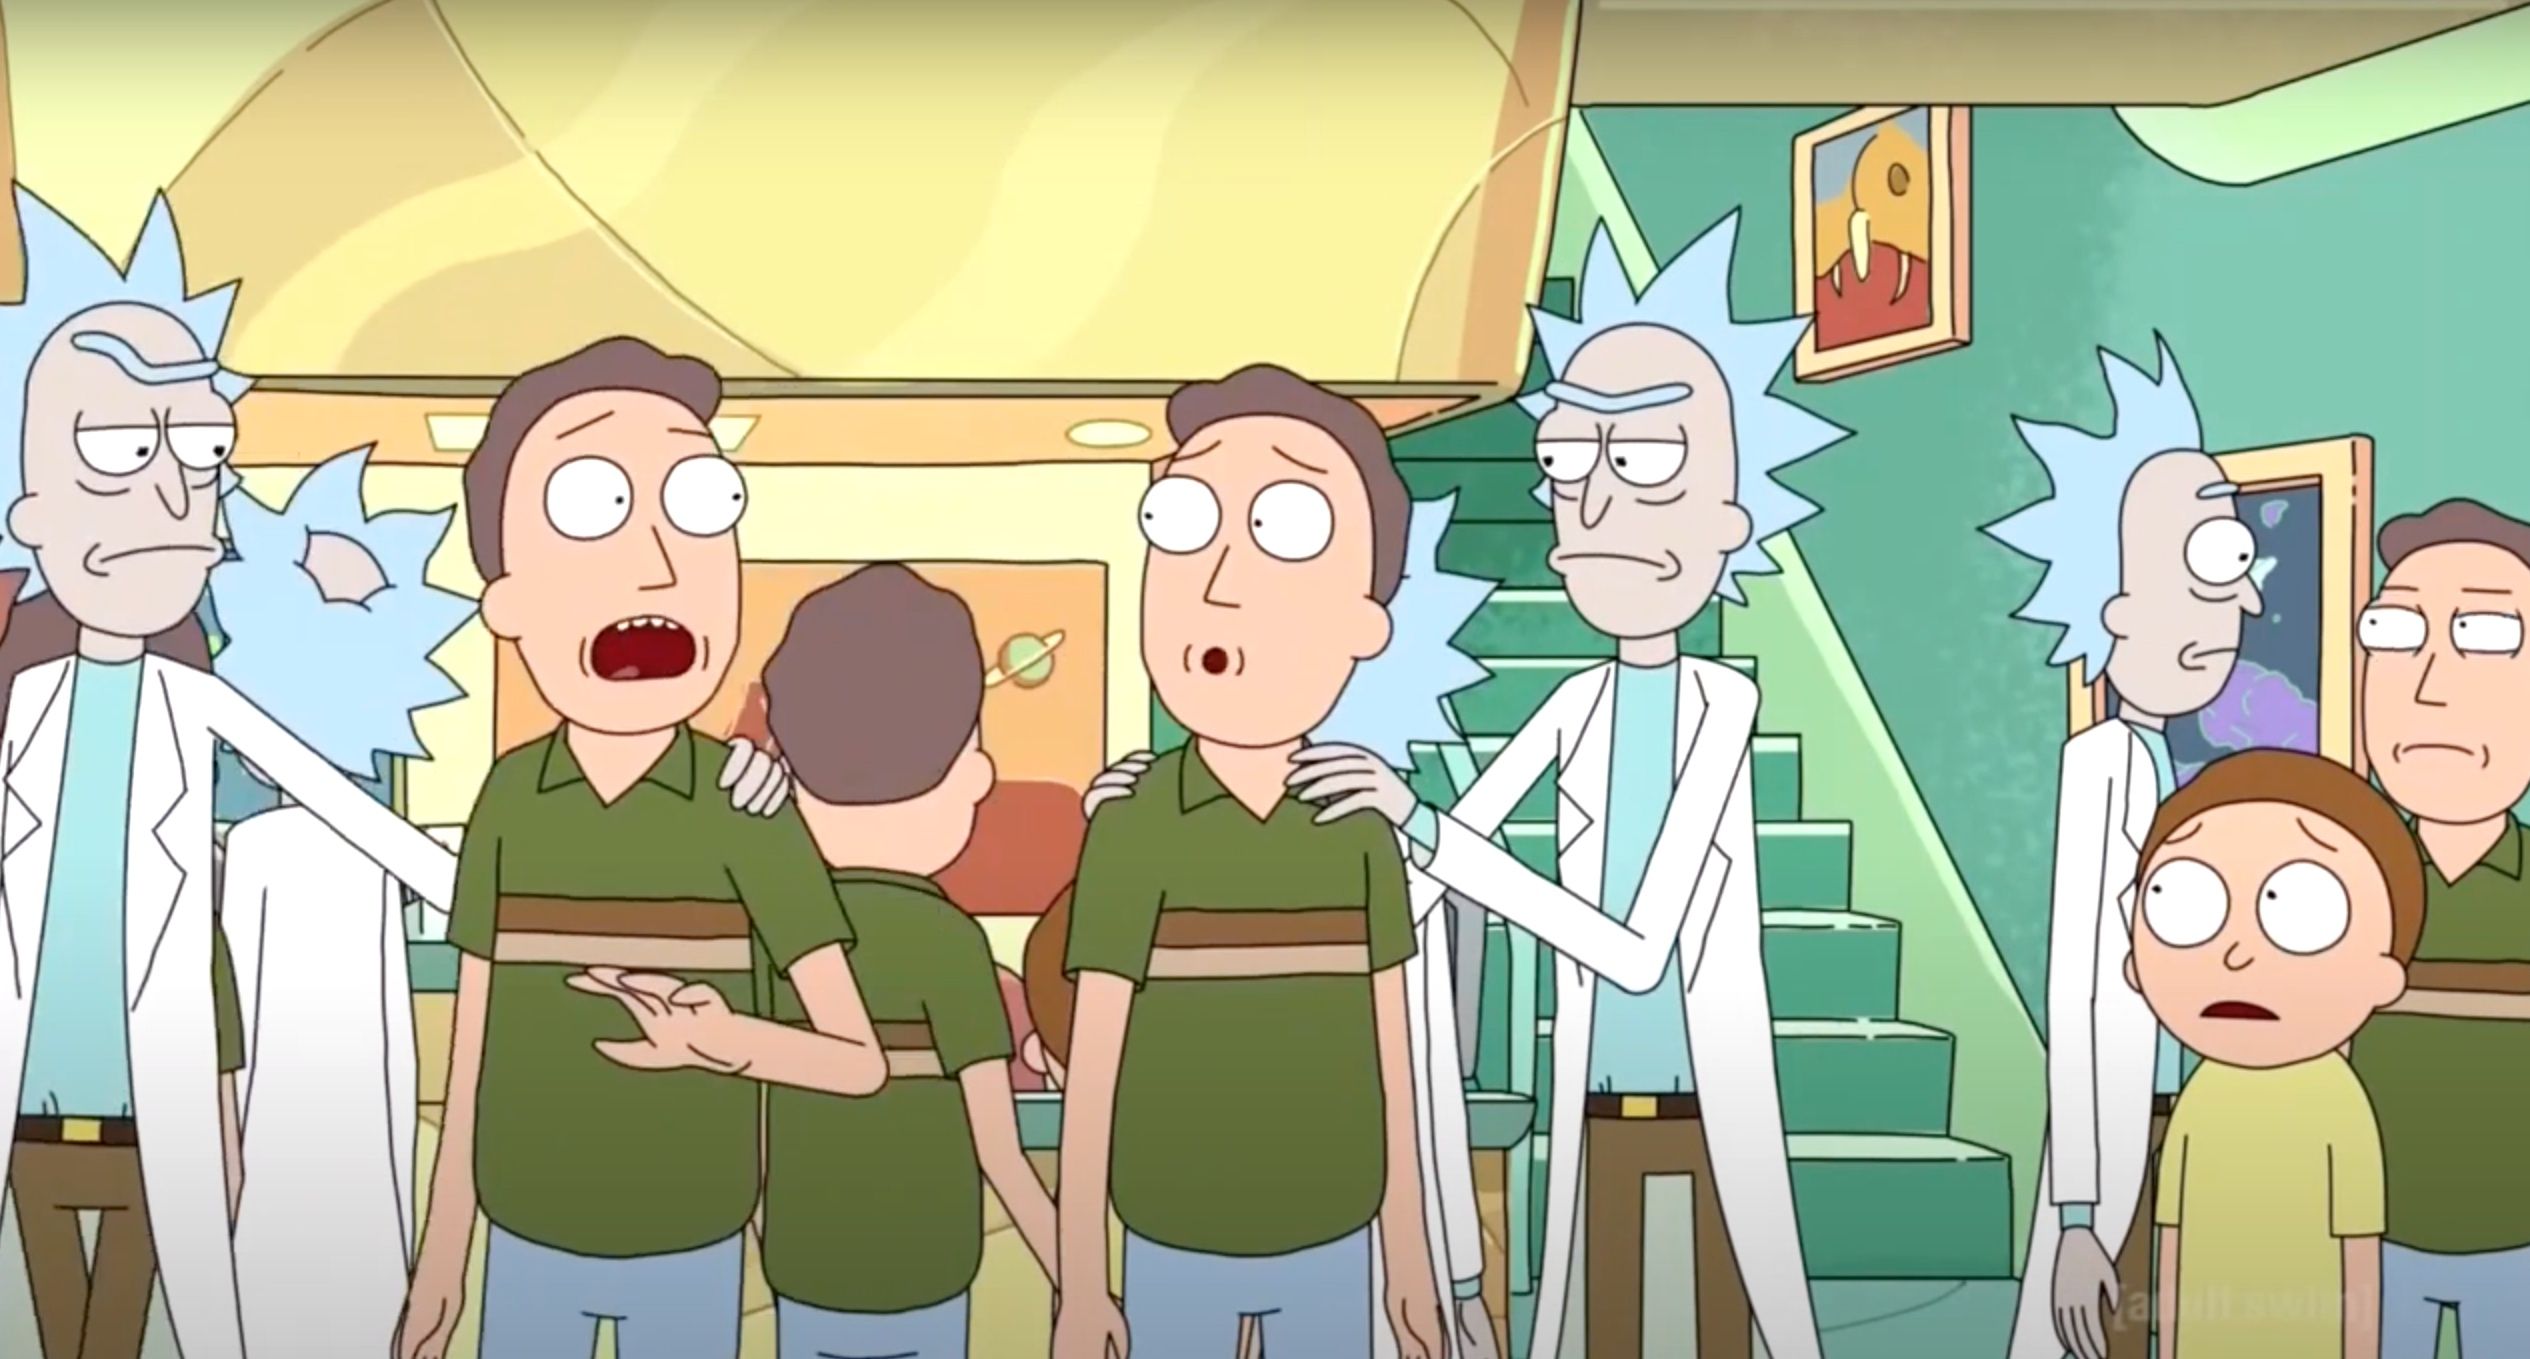 Dan Harmon the Co-Creator of Rick and Morty has a new show (Krapopolis)  premiering in 2 days. How many will be watching? : r/rickandmorty